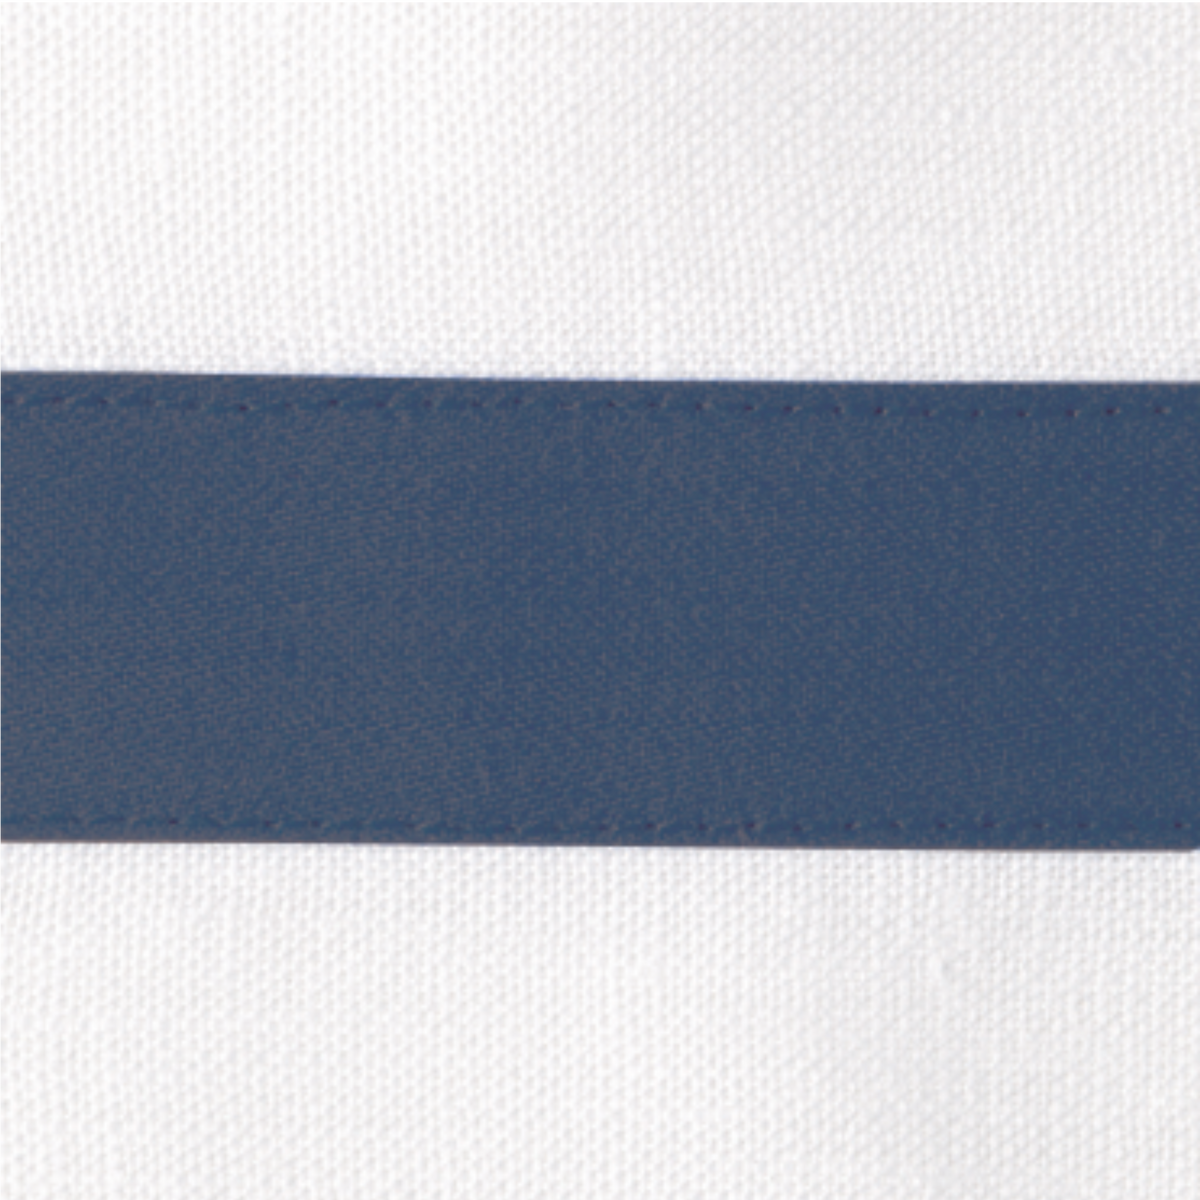 Swatch Sample Showing Fabric Detail of Matouk Lowell Bedding Steel Blue Color